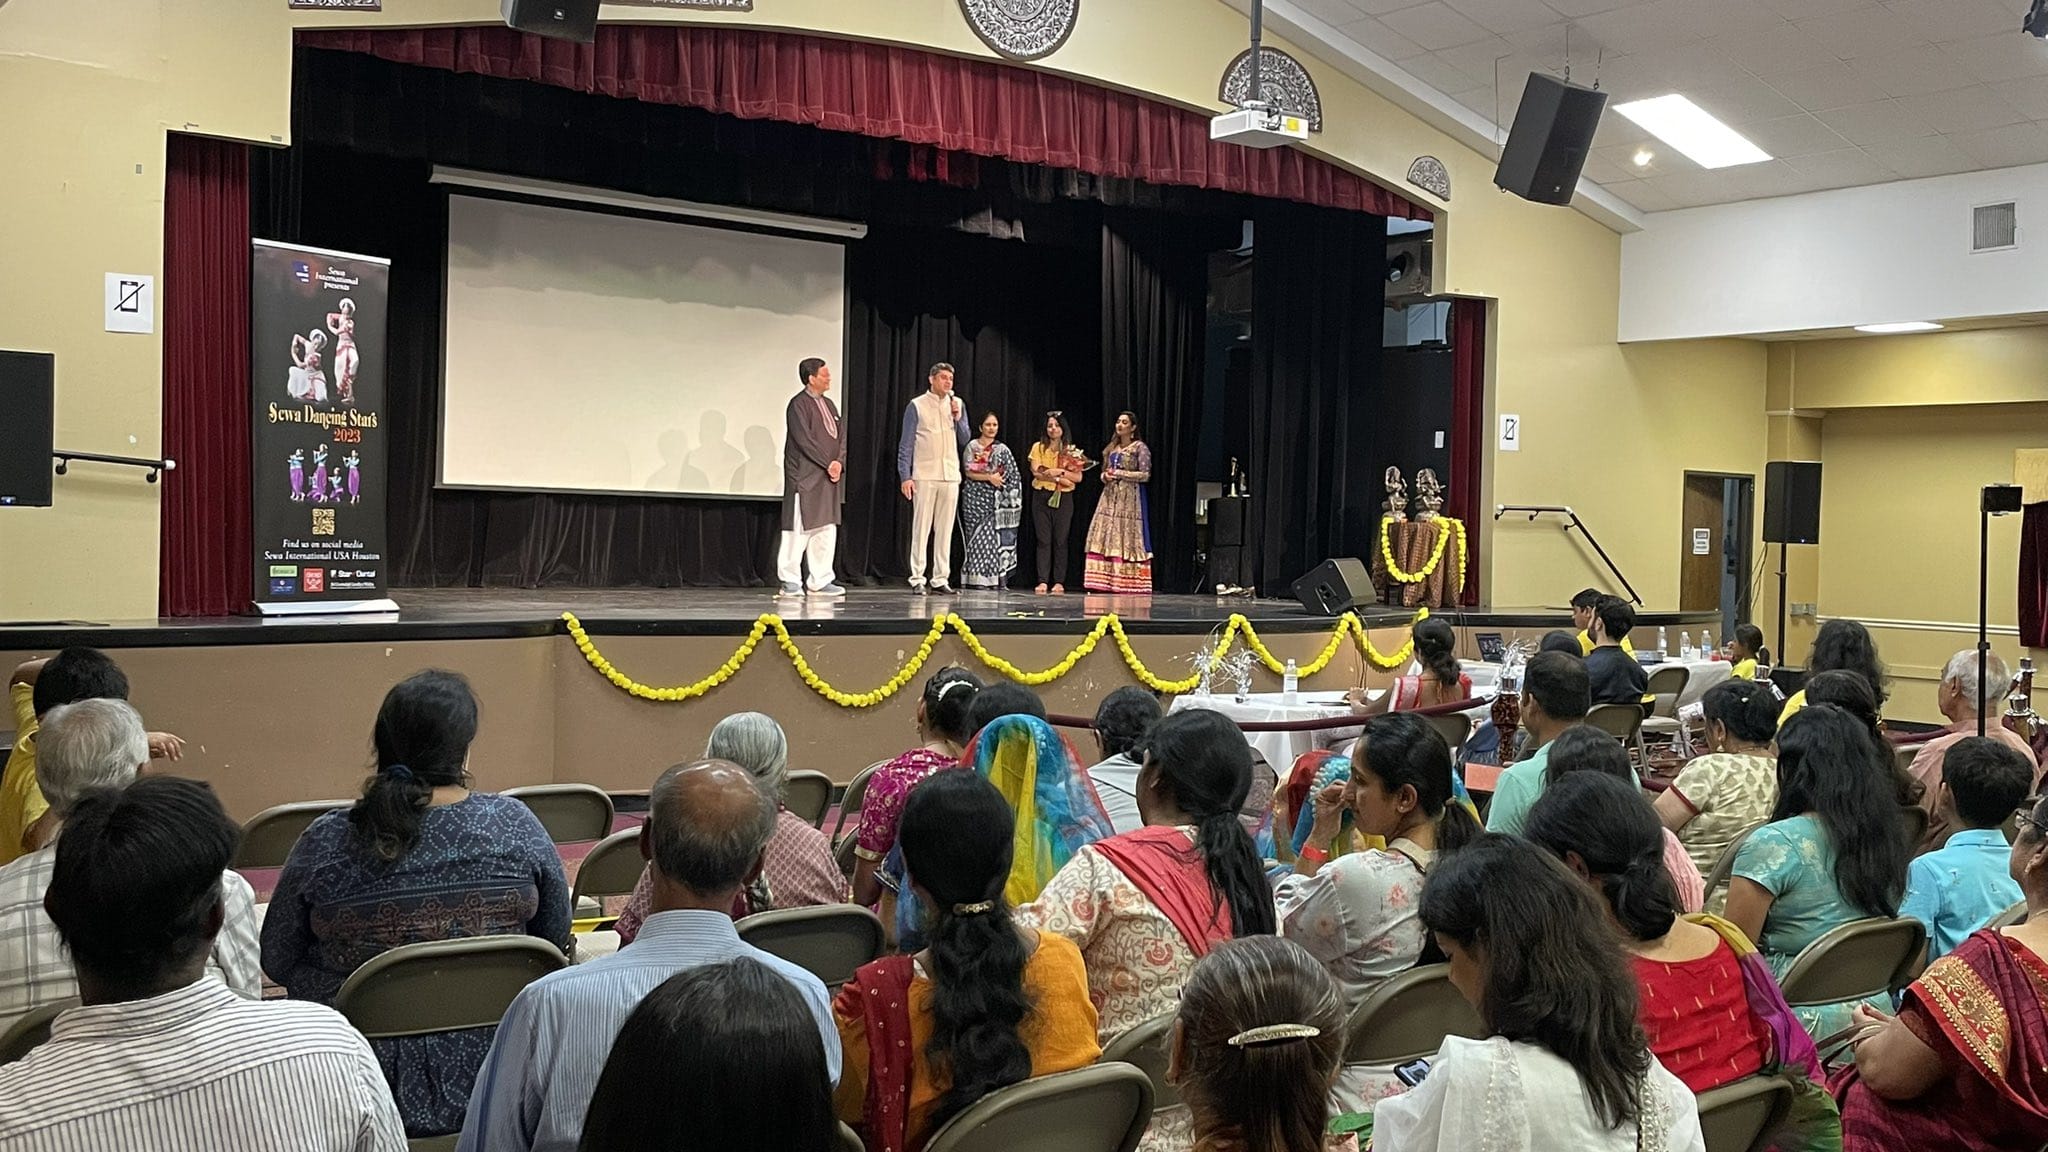 Consul General participated in SEWA International’s event Dancing Stars 2023 on August 26,2023